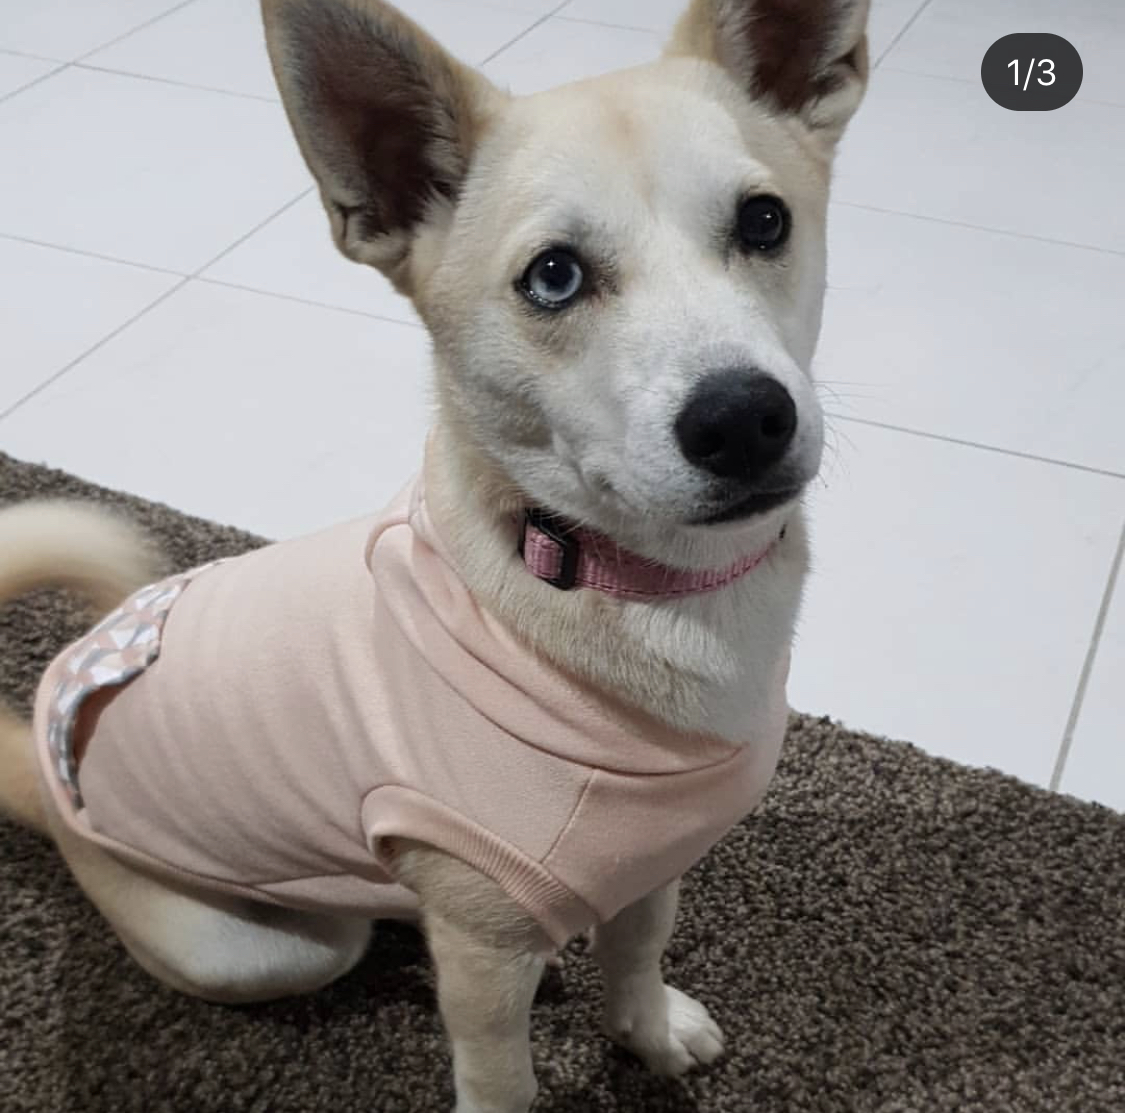 A Jack Husky wearing a peach colored shirt while sitting on the carpet